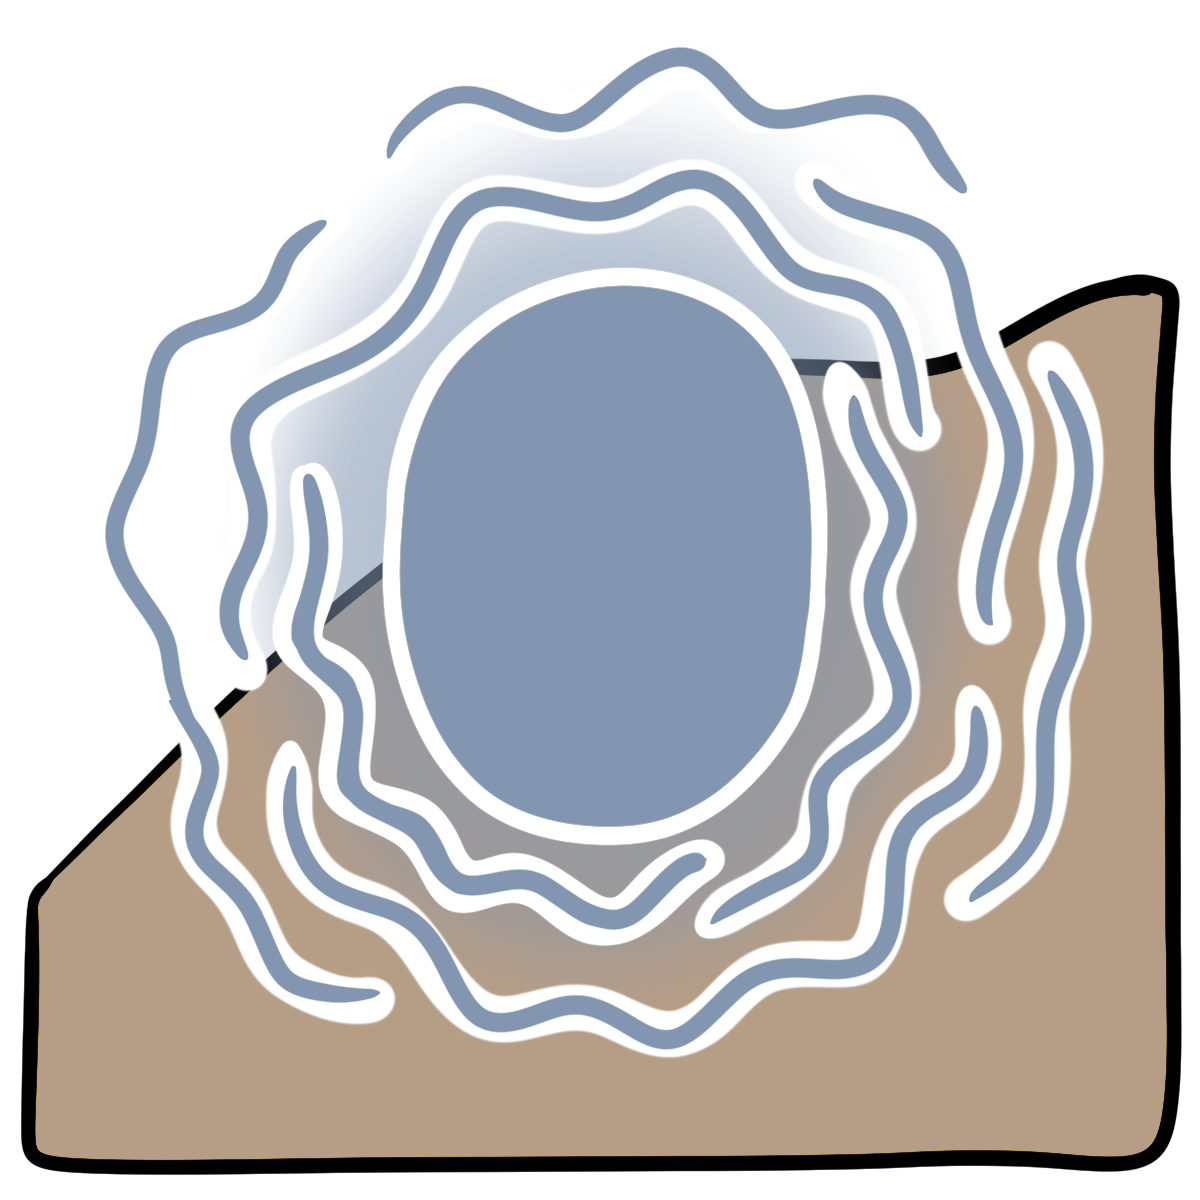 A light blue glowing oval surrounded by squiggly lines. Curved beige skin fills the bottom half of the background.